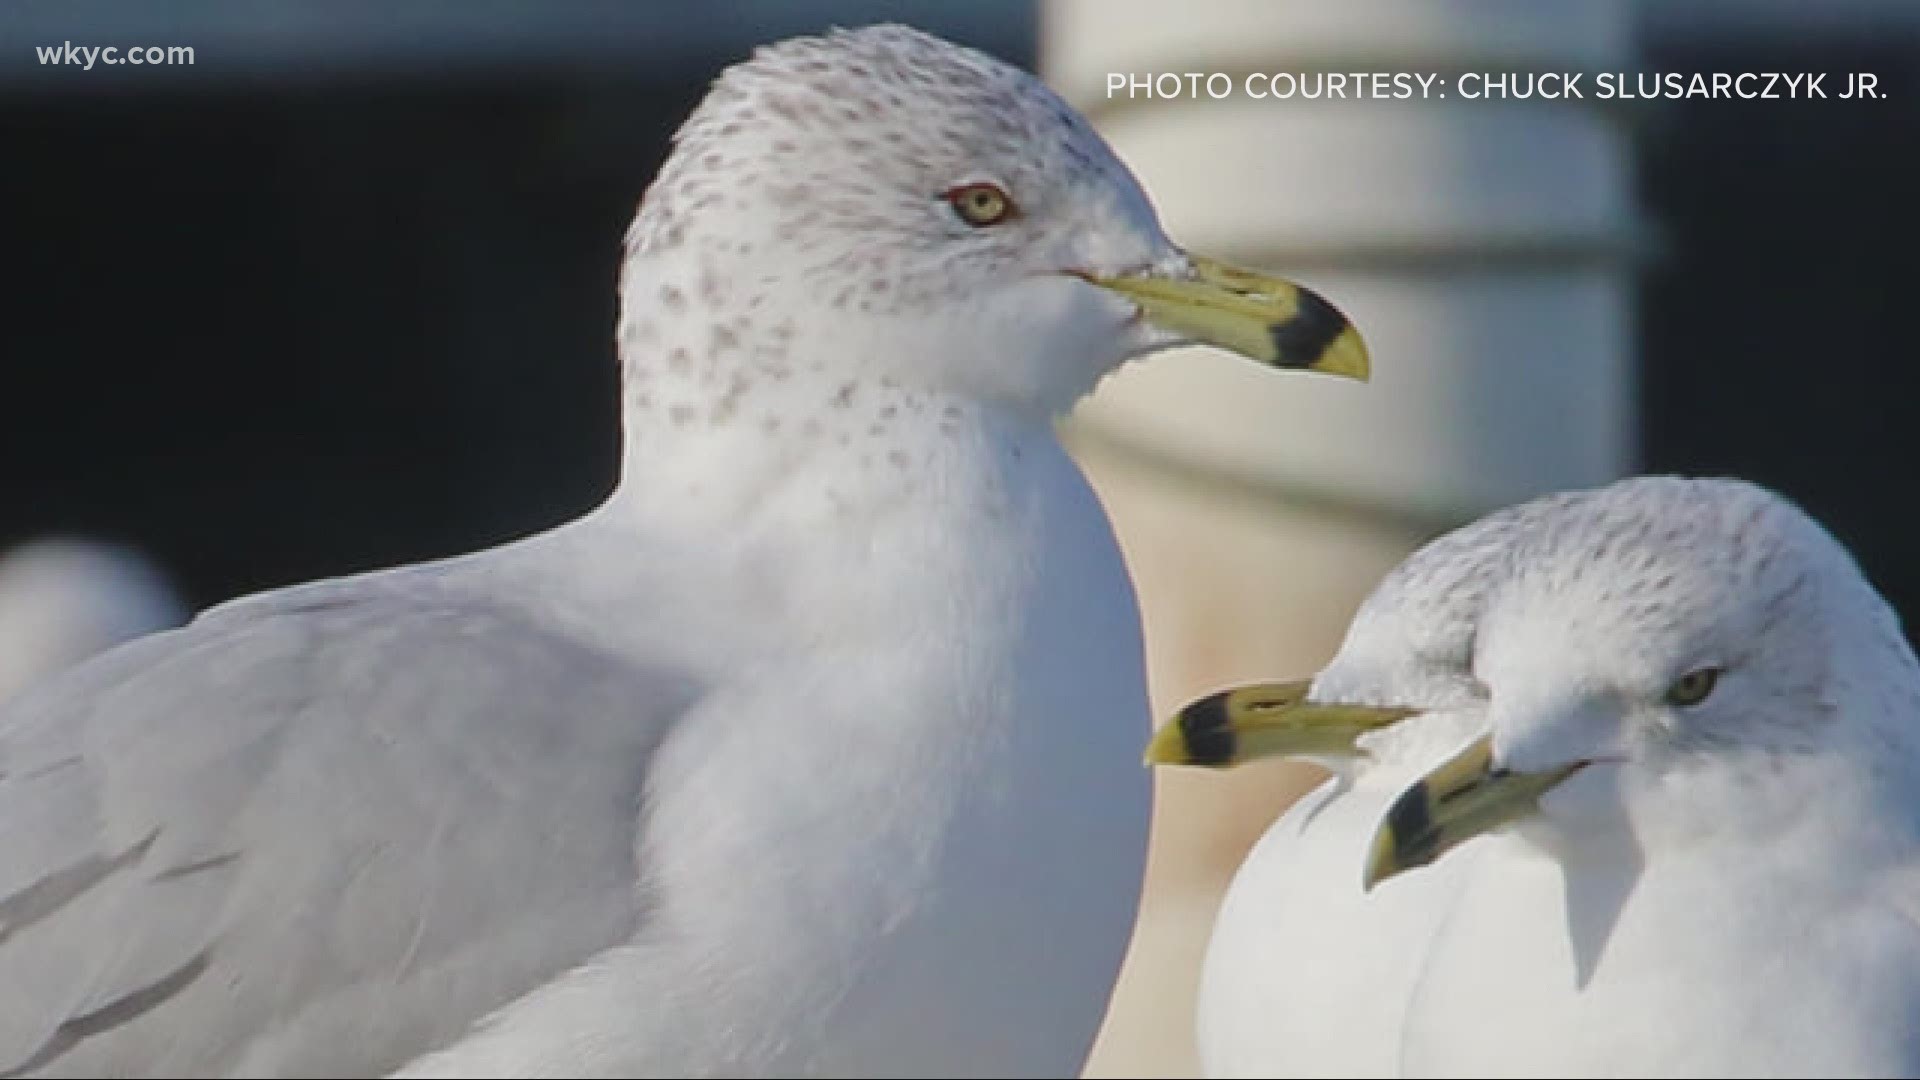 Avid birder and nature photographer finds oldest living known bird of its species along the shores of Lake Erie. Carl Bachtel reports.